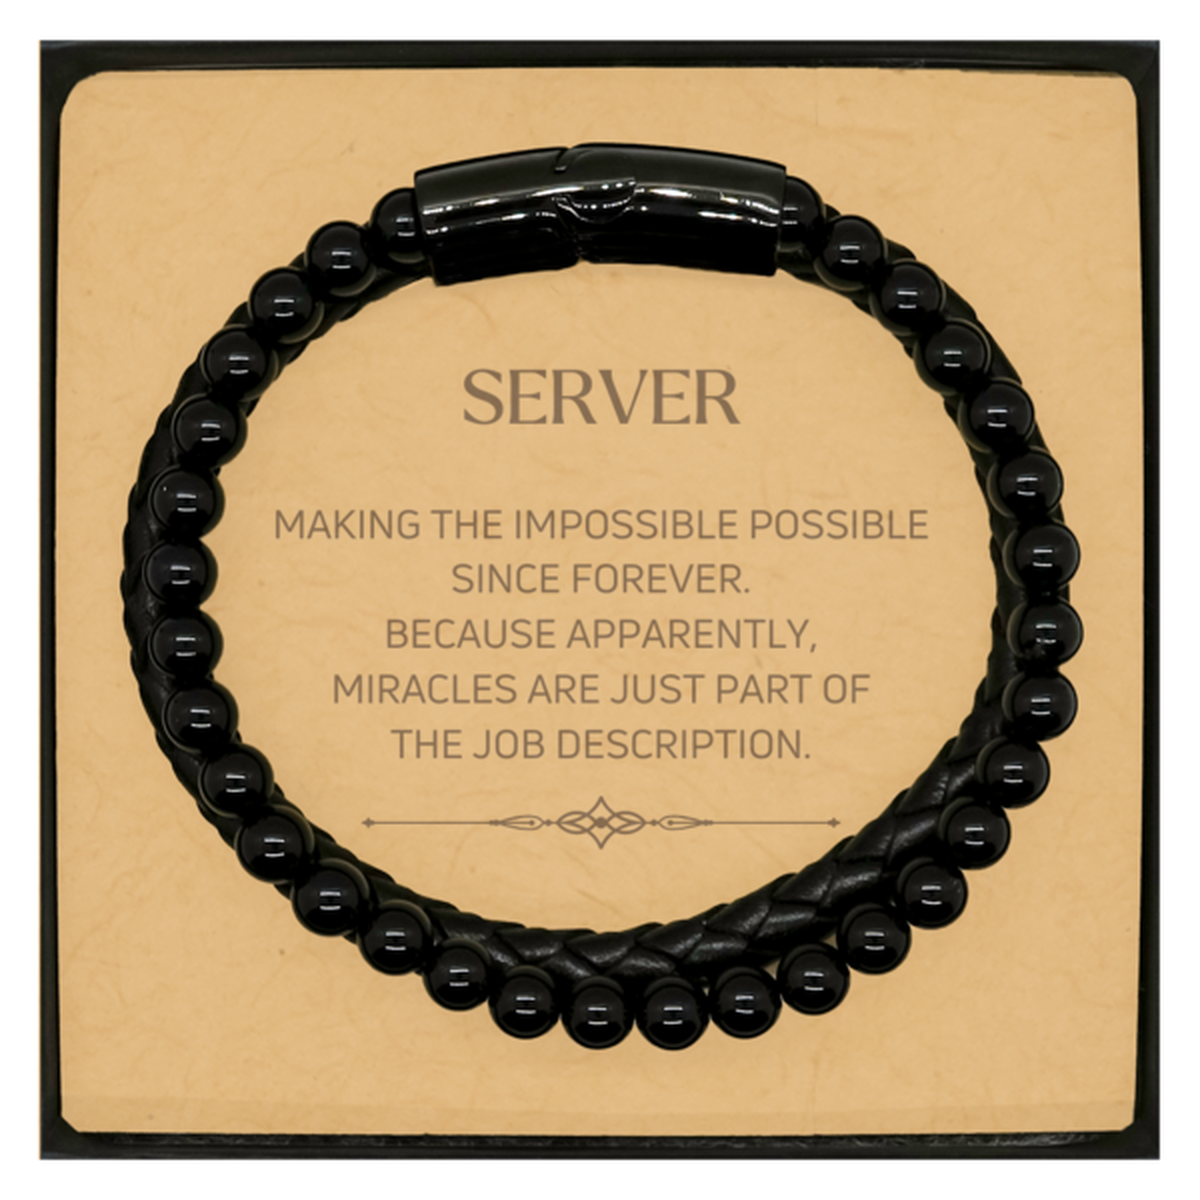 Funny Server Gifts, Miracles are just part of the job description, Inspirational Birthday Christmas Stone Leather Bracelets For Server, Men, Women, Coworkers, Friends, Boss